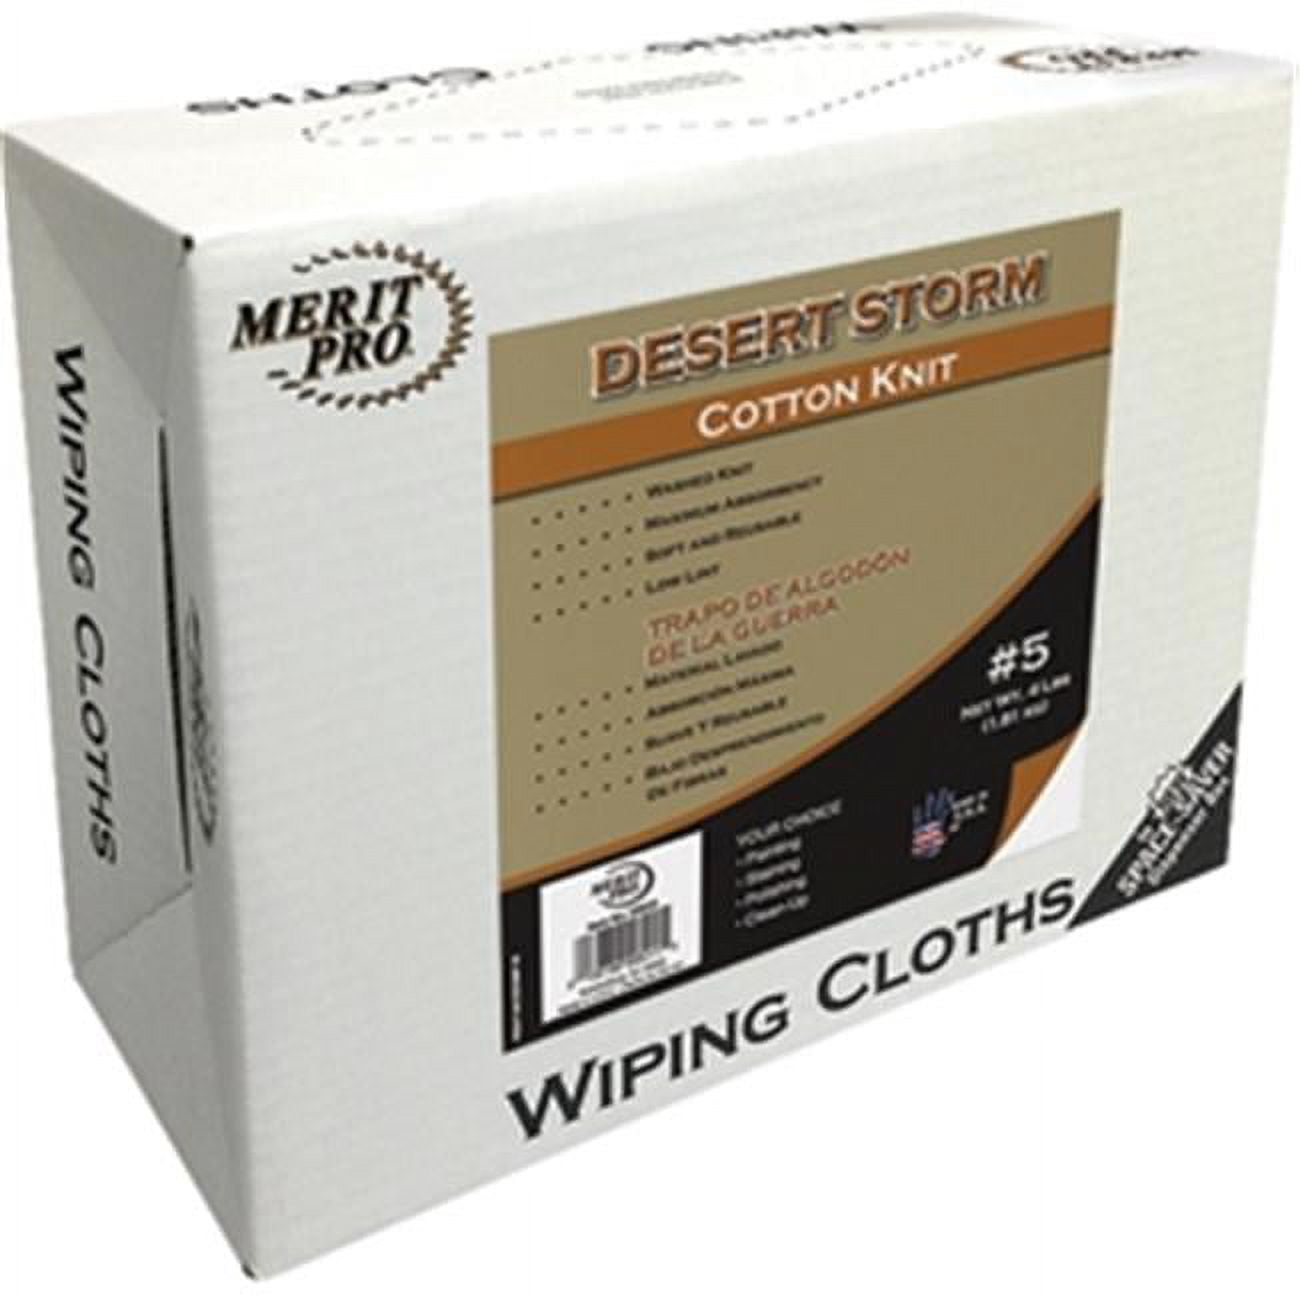 New Washed Tan Material Rags - Desert Storm - 50 LB Box : 10-200-A